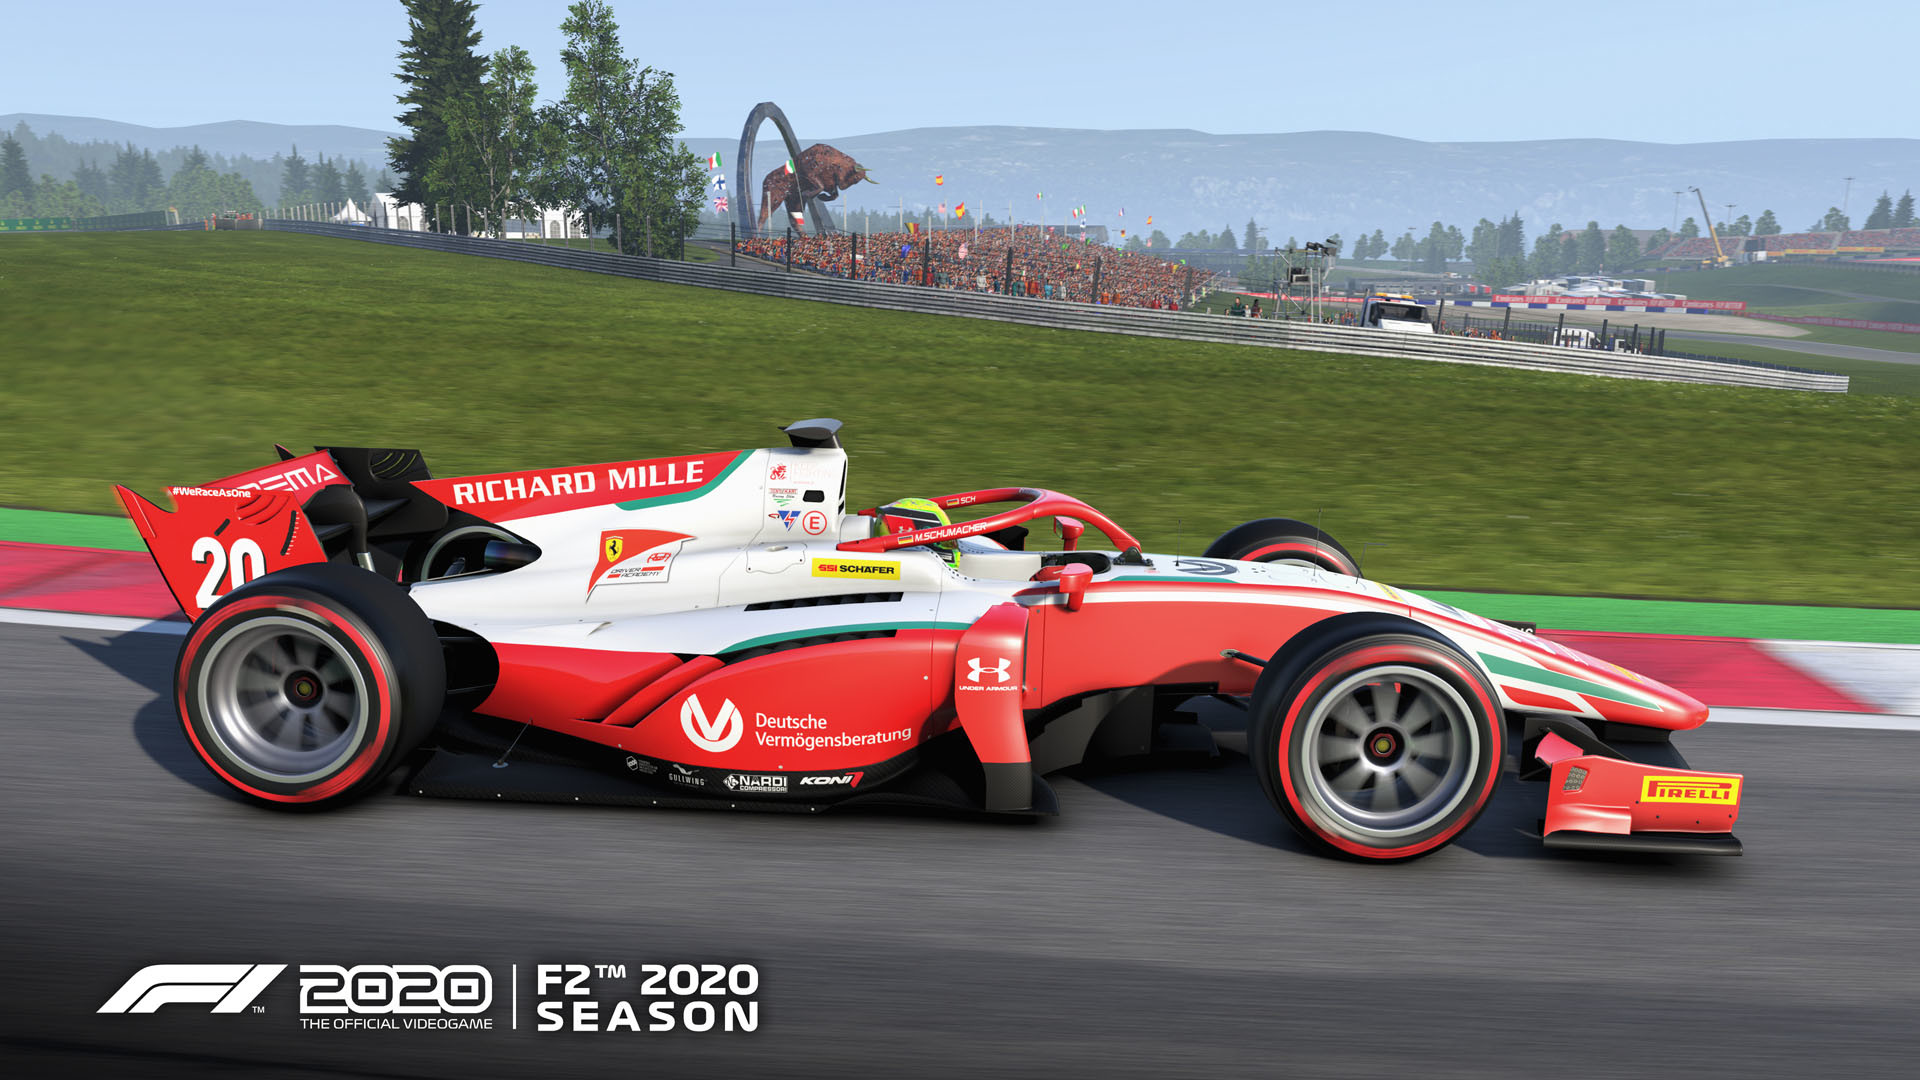 Find the best computers for F1 2020